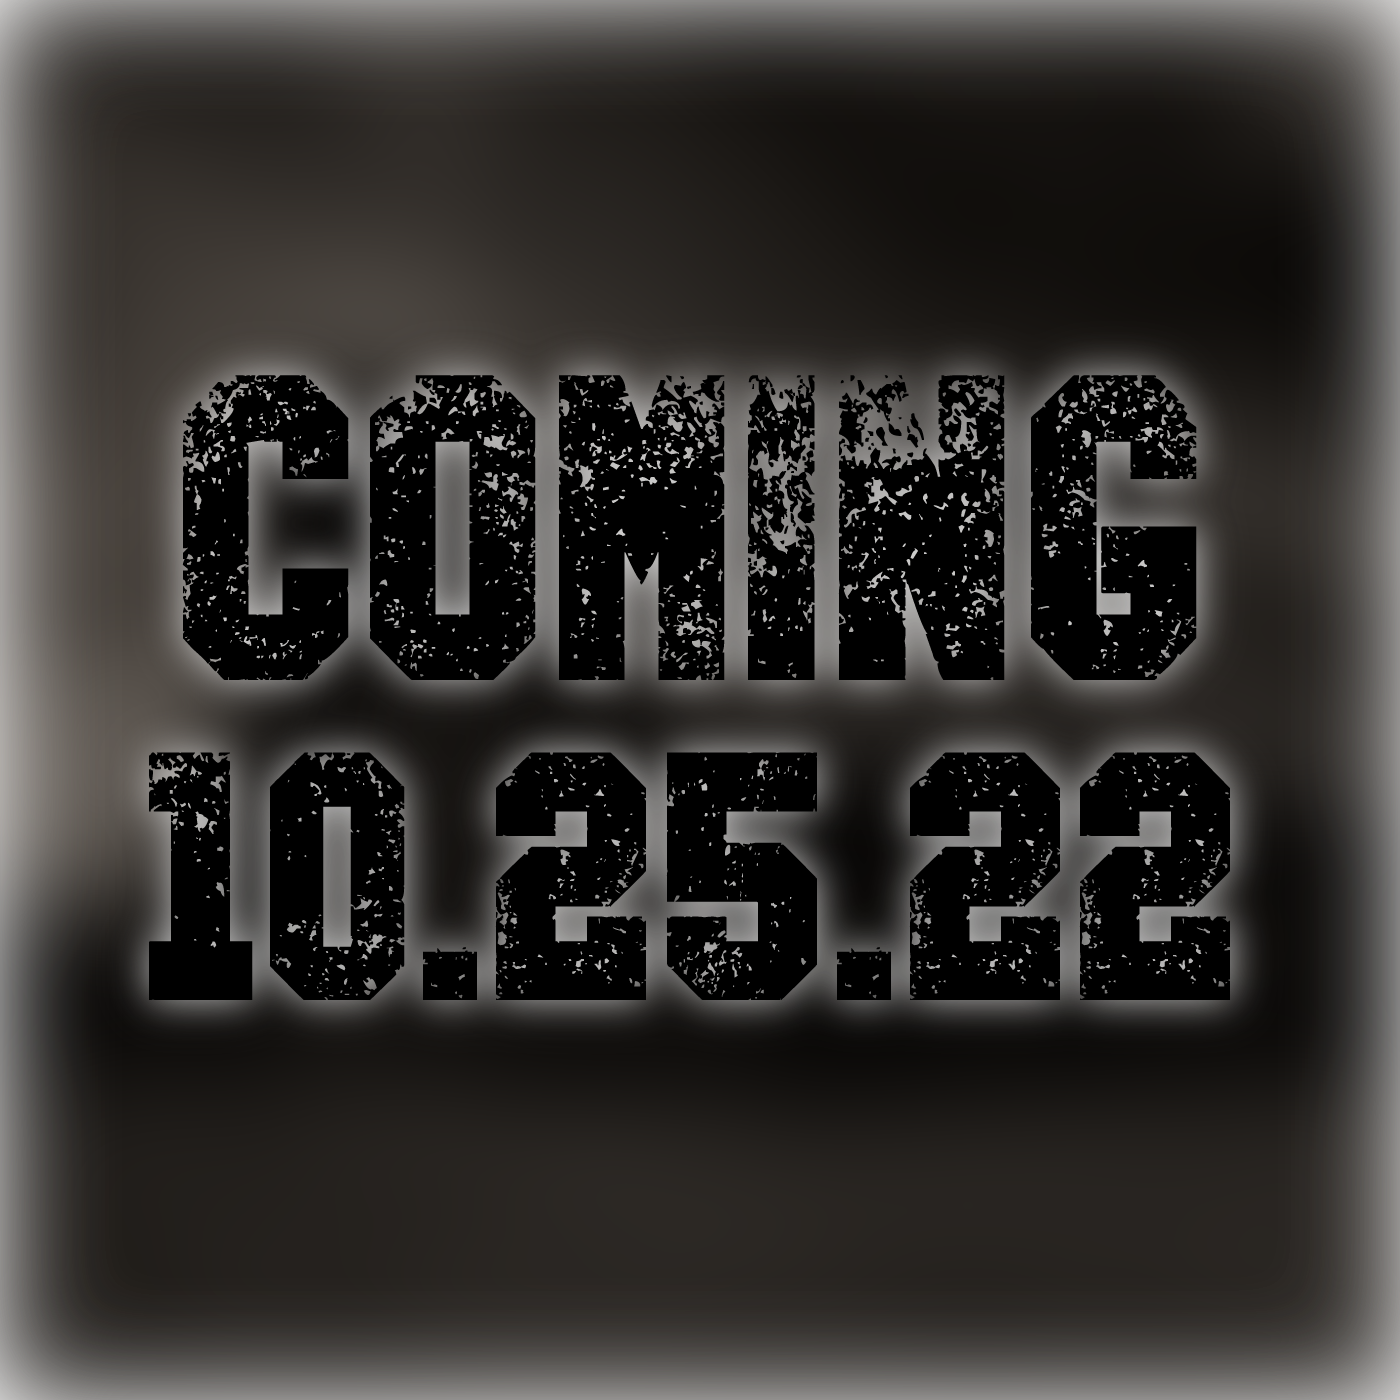 Coming 10.25.22